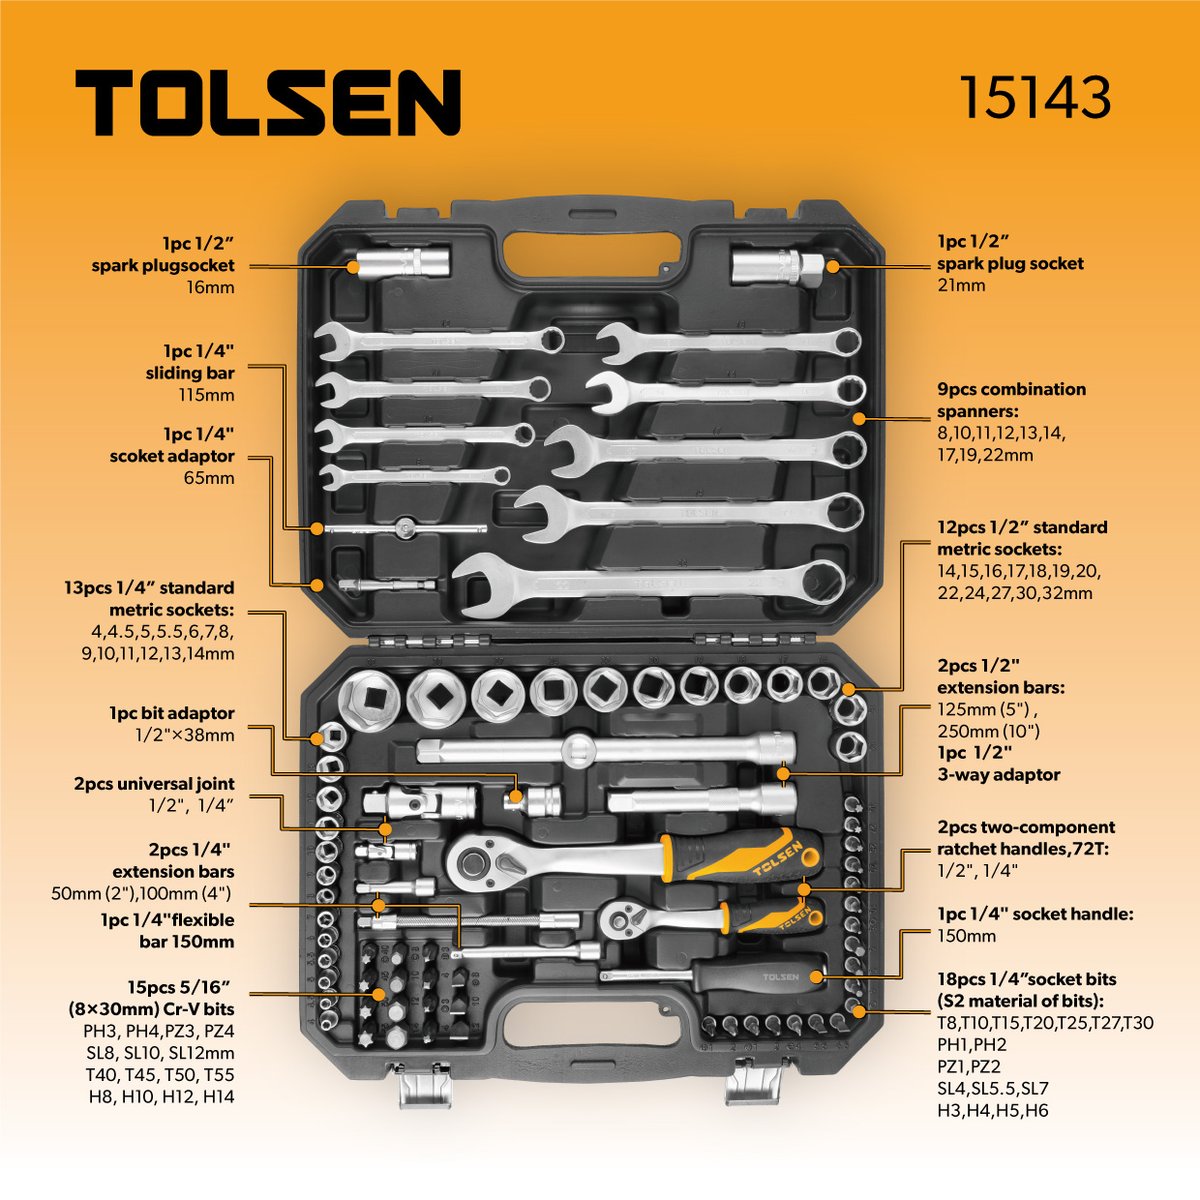 Newest Arrival!👏 Welcome to consult our sales and local distributors to order TOLSEN 82Pcs 1/2' + 1/4″Socket Set. TOLSEN 15143: bit.ly/3yq7c2f #tolsen #tolsentools #socketset #toolbox #toolset #toolkit